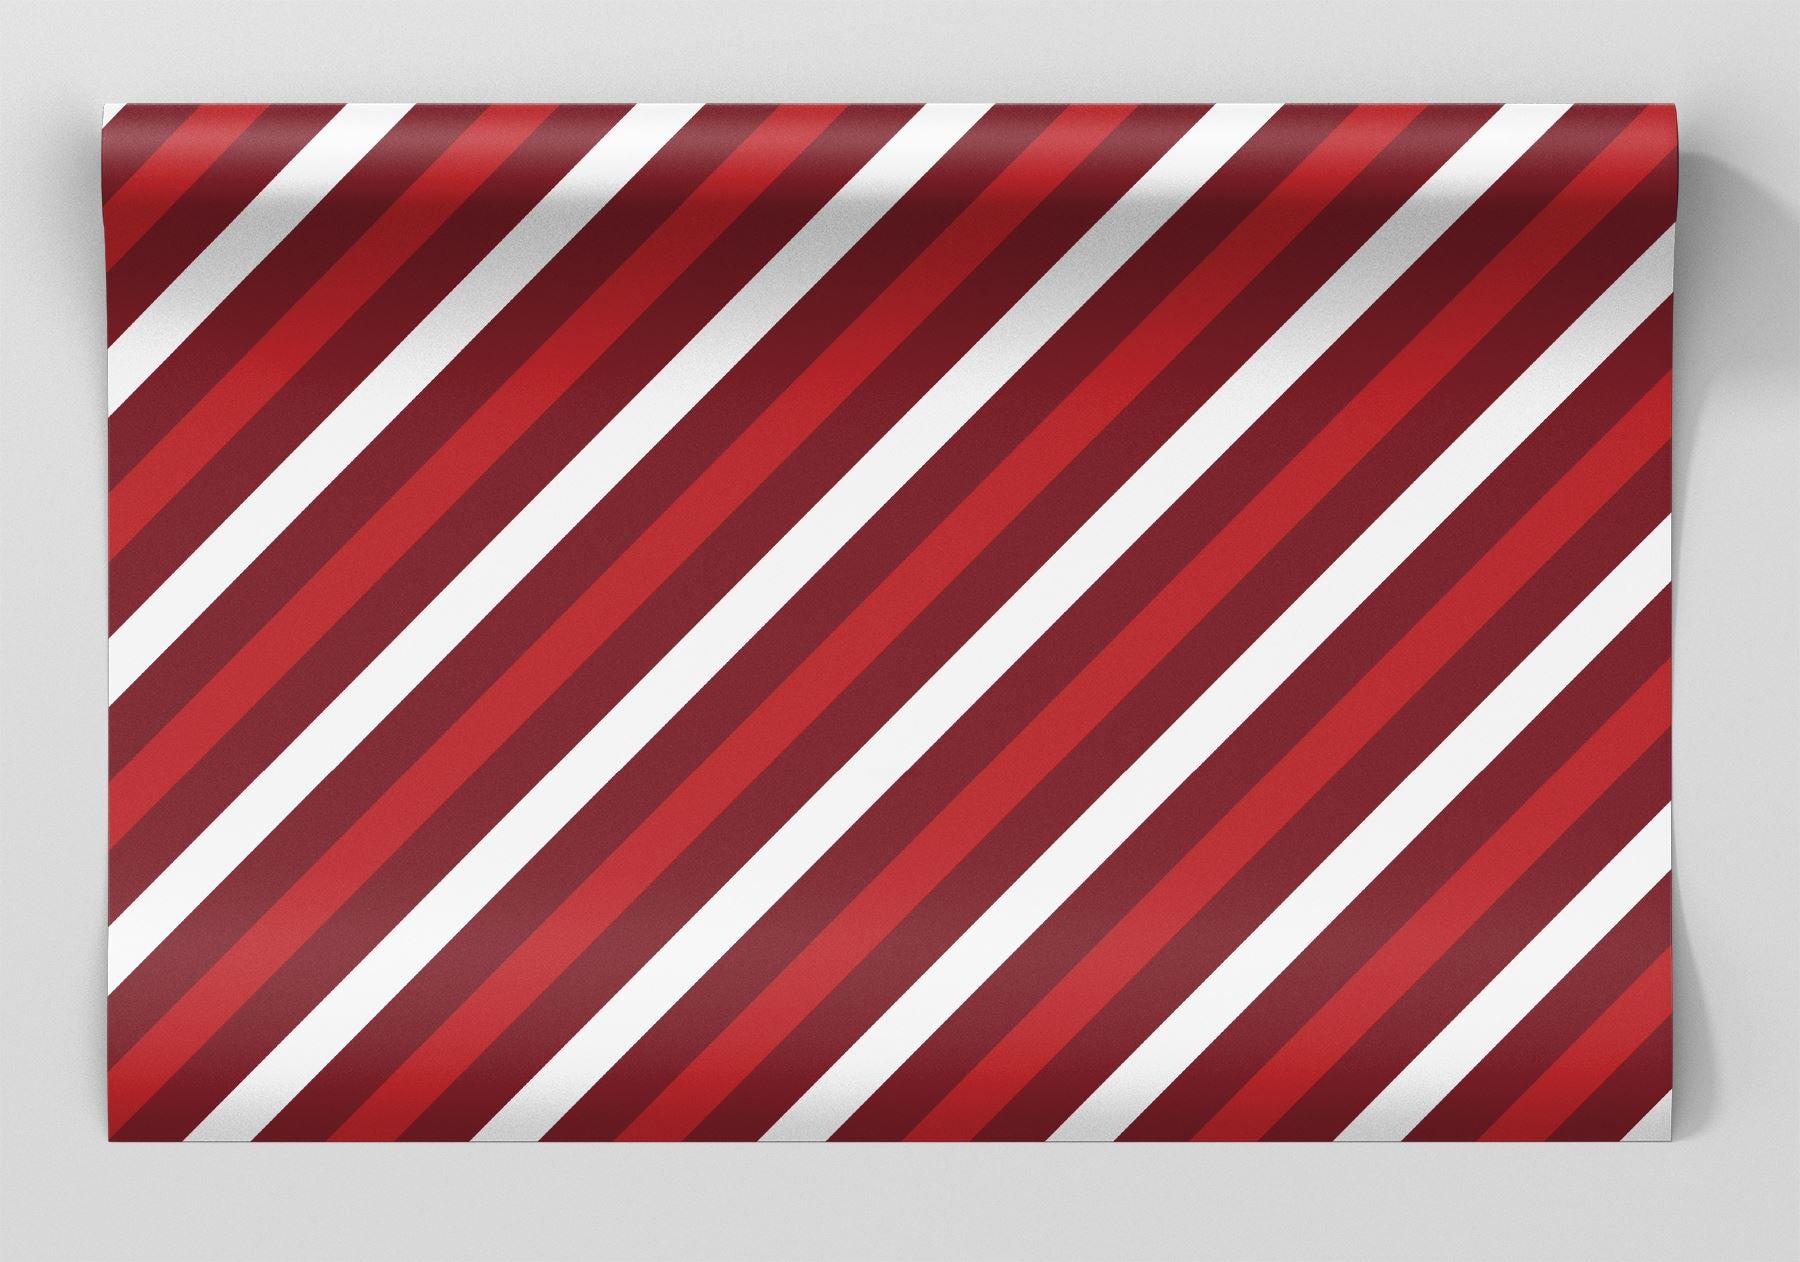 Red Candy Cane Stripes Wrapping Paper Alexander's 